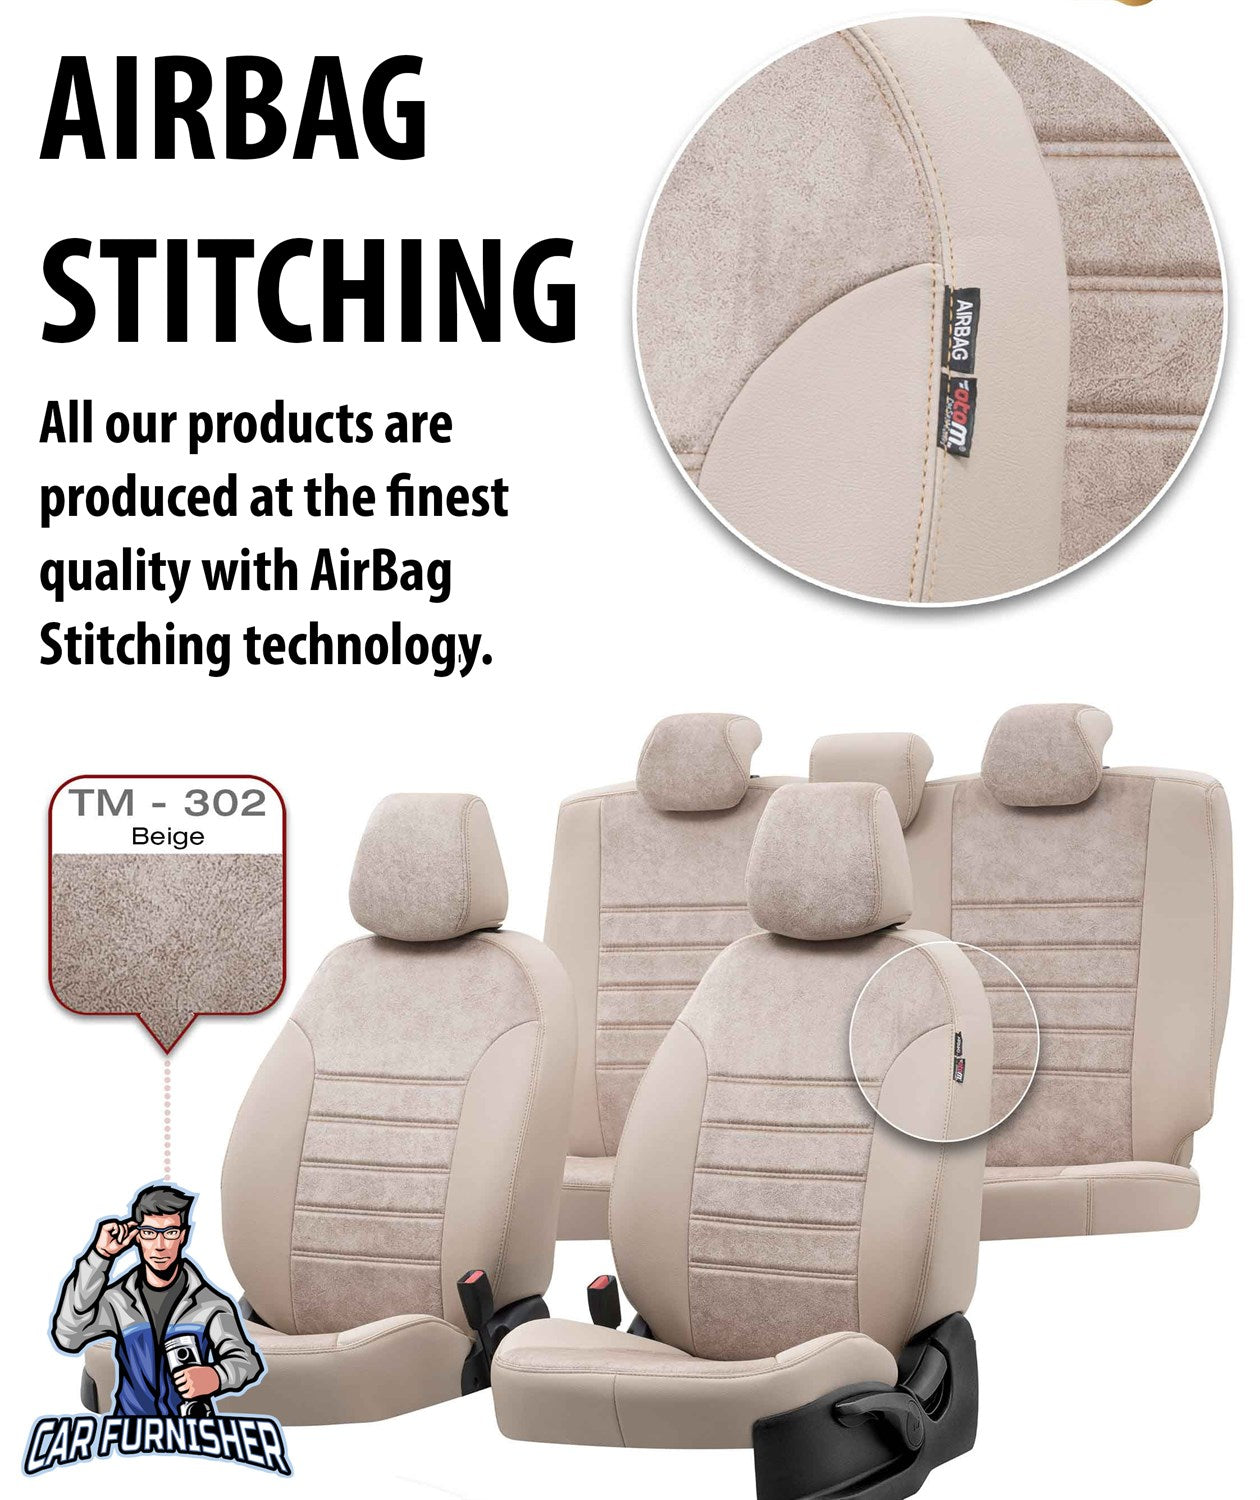 Nissan Interstar Seat Cover Madrid Leather Design Smoked Black Leather & Suede Fabric